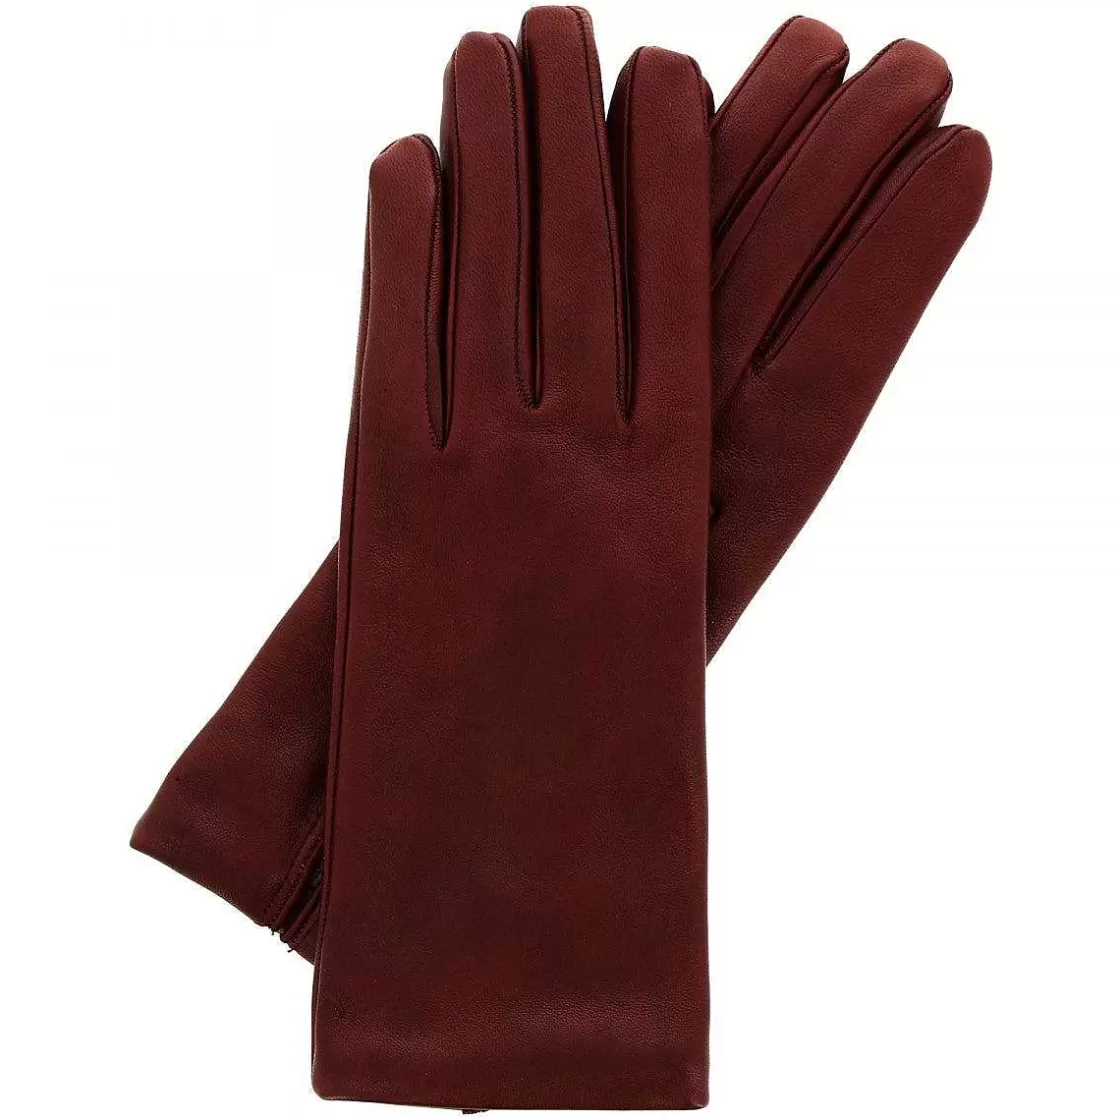 Leonardo Classic Women'S Handmade Gloves In Burgundy Nappa Leather Lined In Cashmere Clearance